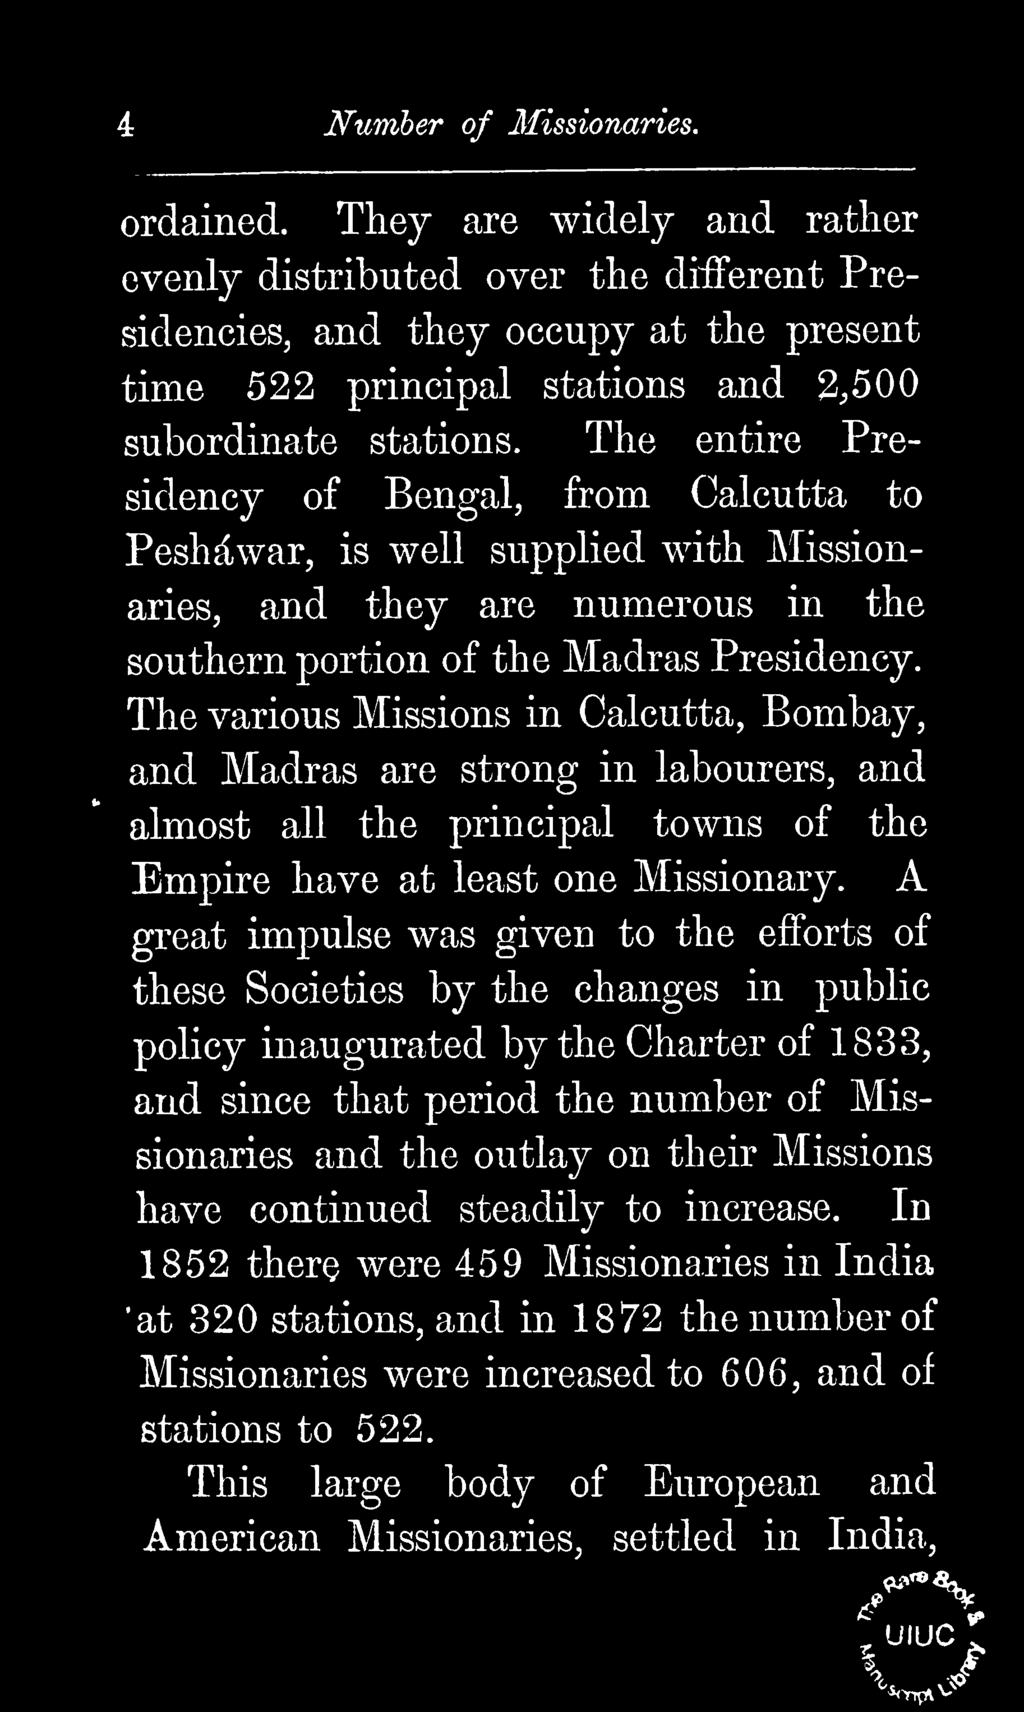 The various Missions in Calcutta, Bombay, and Madras are strong in labourers, and almost all the principal towns of the Empire have at least one Missionary.